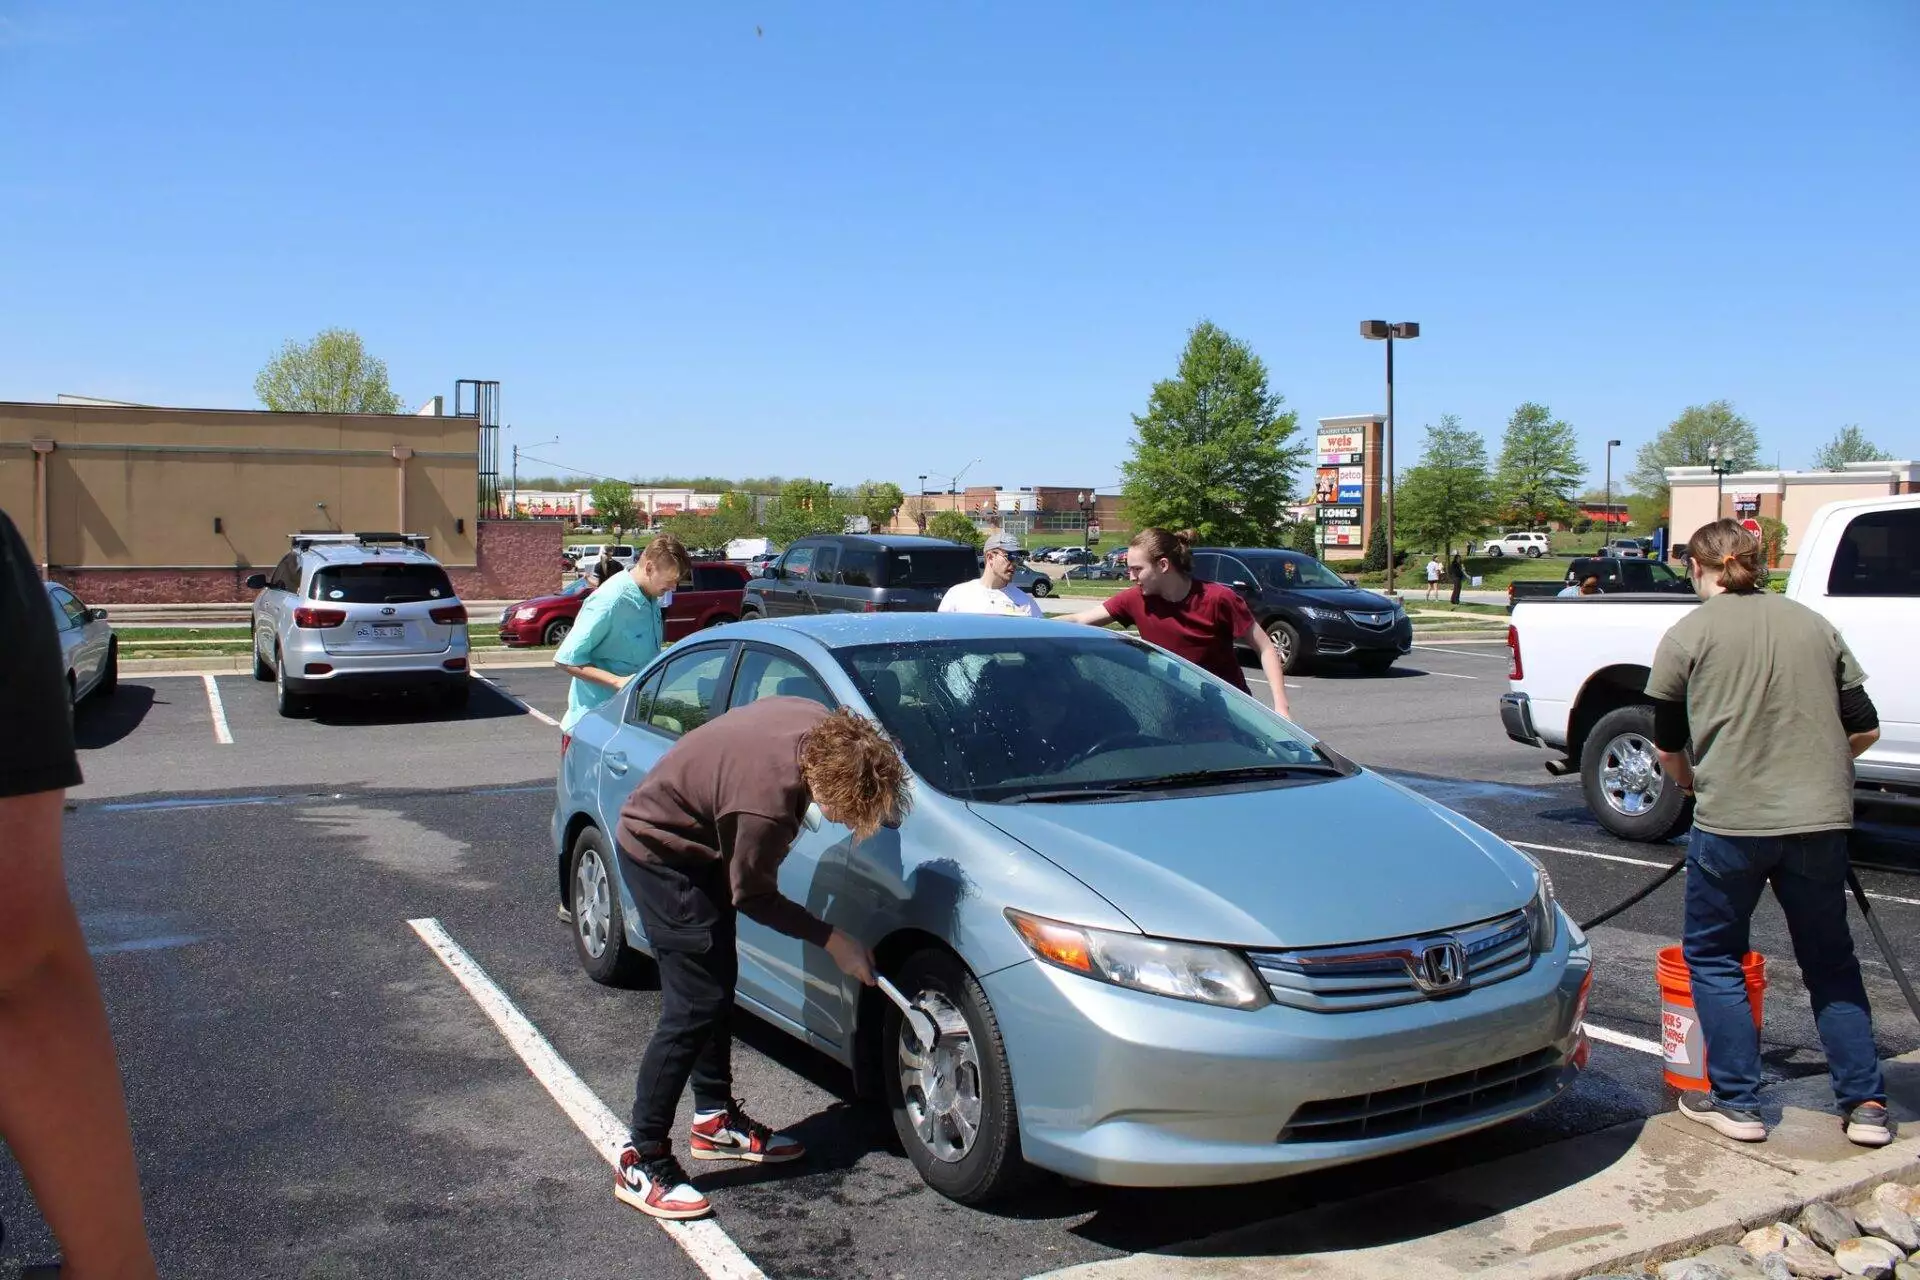 A group of people washing cars in a sunny parking lot, with various vehicles and a commercial building in the background.